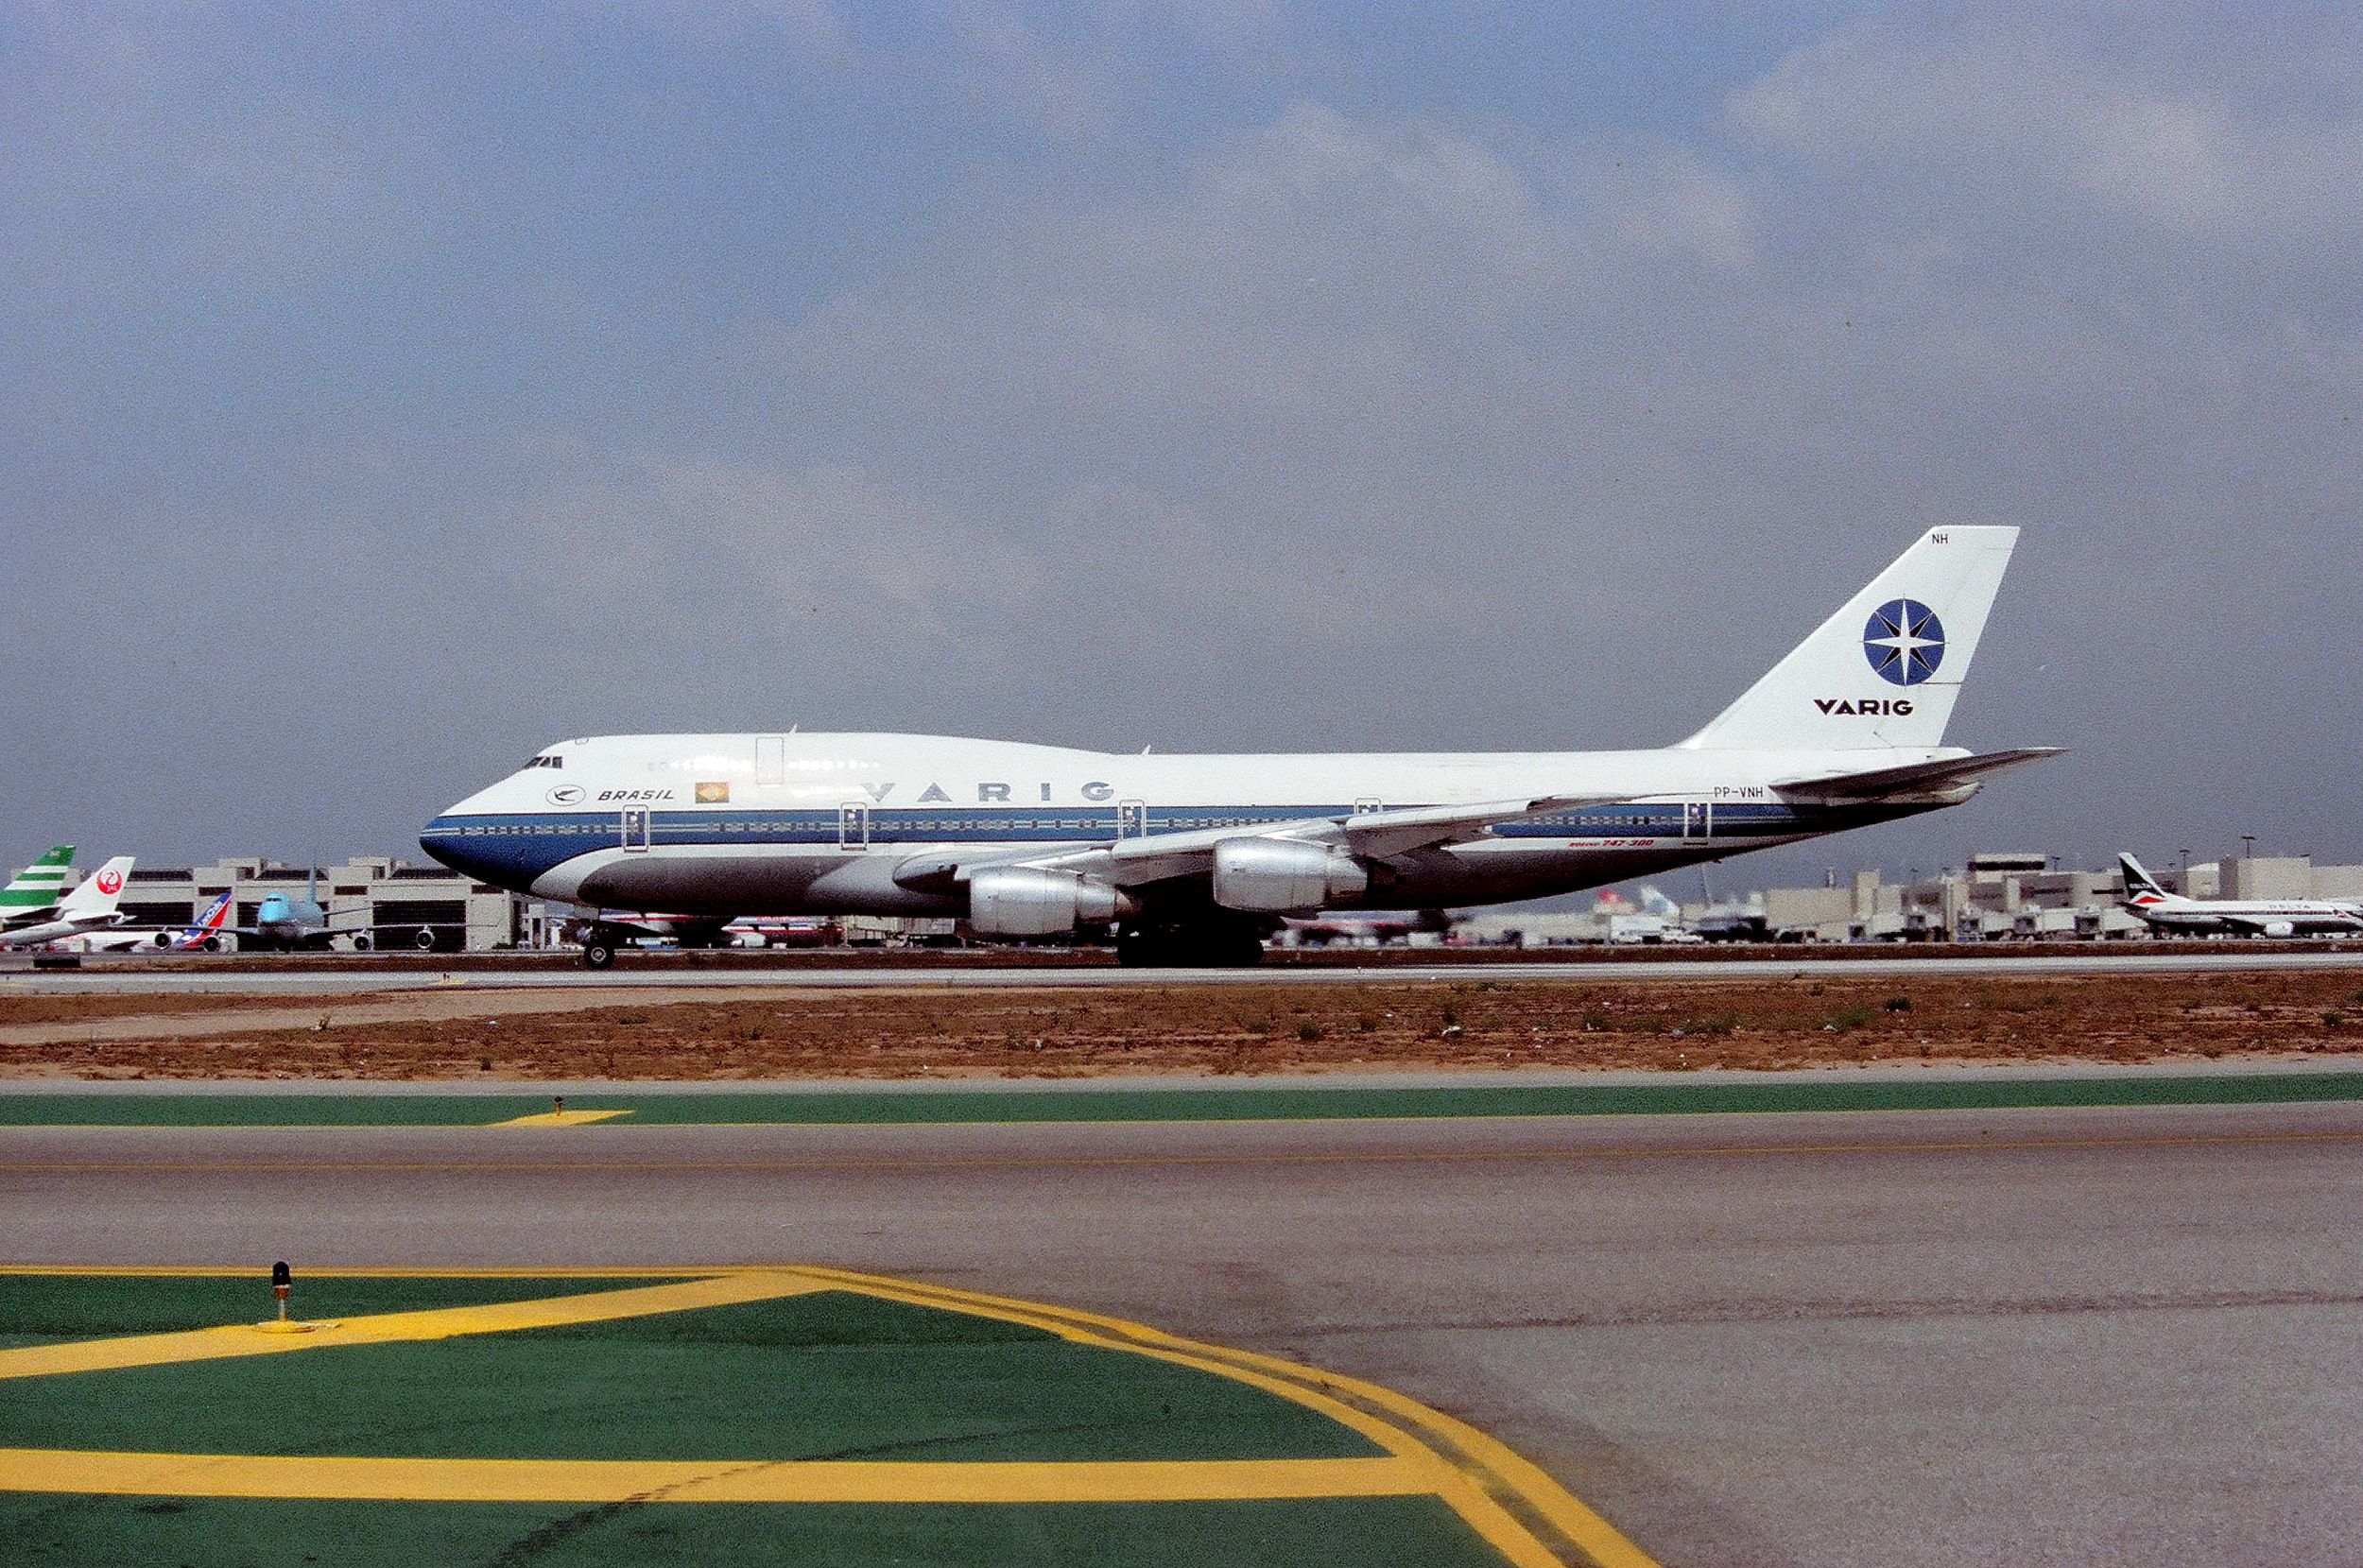 BOEING 747-300 (PP-VNH) - KLAX - March 1989 or 1990 - VARIG Boeing 747-3 series - one of my few trips to the LAX airline collectible show - the old Imperial terminal was still open and one could park here all day and photograph one airliner after another arriving LAX - I brought a small ladder as the fence was only 6ft tall. Note the mix of airlines at the Intl dock - and the tail of a Pan Am 747 on the right background!br /br /Serial number 23394 LN:627br /Type 747-341Fbr /First flight date 22/11/1985br /br /click full